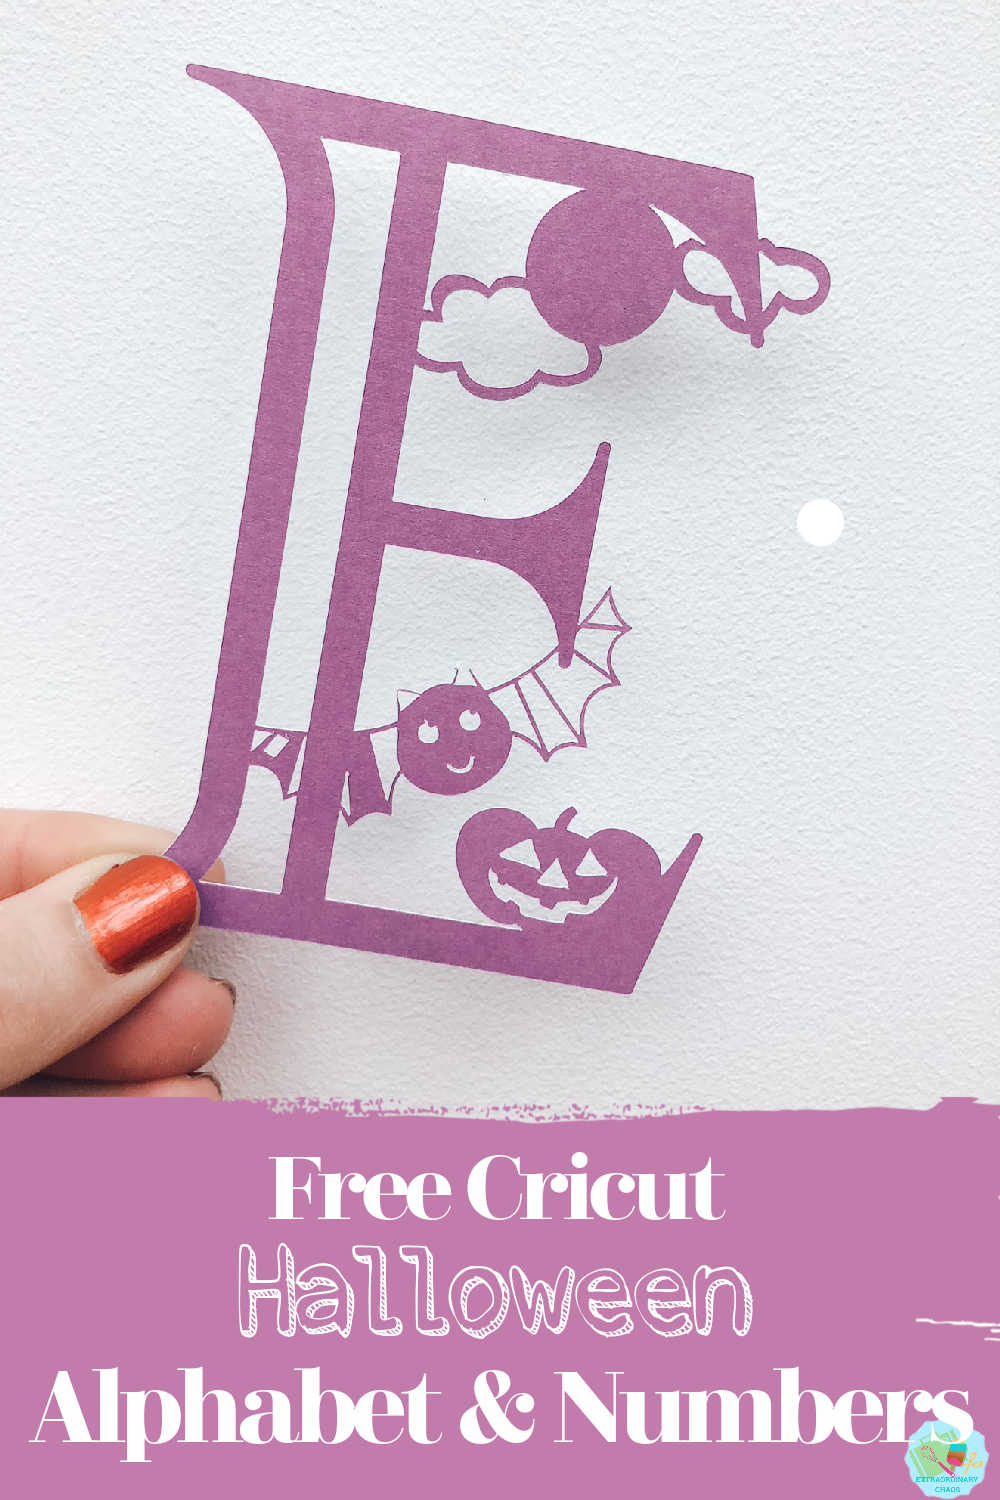 Free Cricut Halloween Alphabet and also numbers for Halloween crafts and parties to make Halloween Decorations